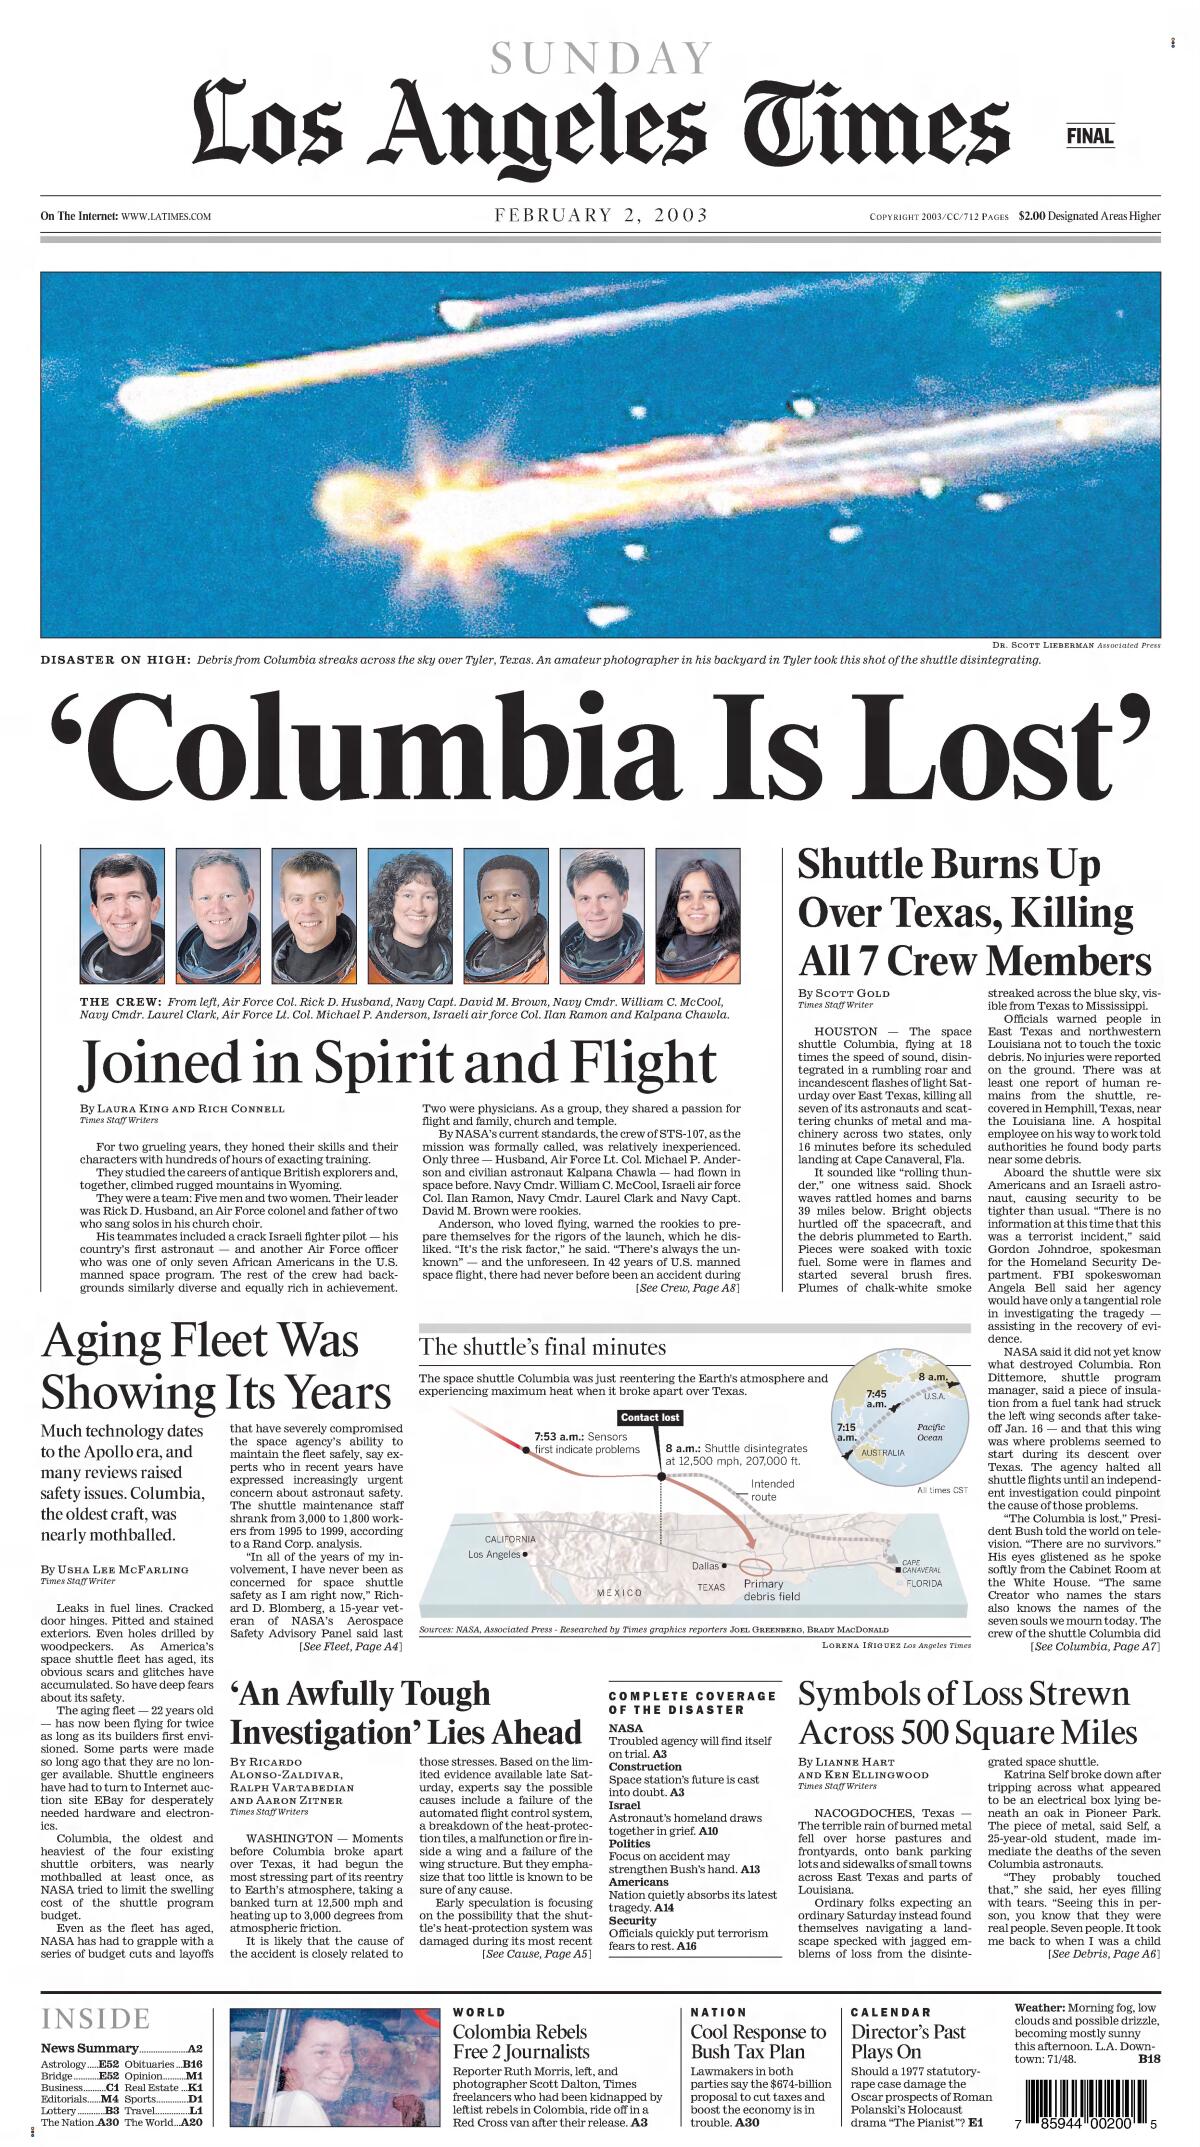 The front page of the Los Angeles Times depicting the space shuttle Columbia disaster.